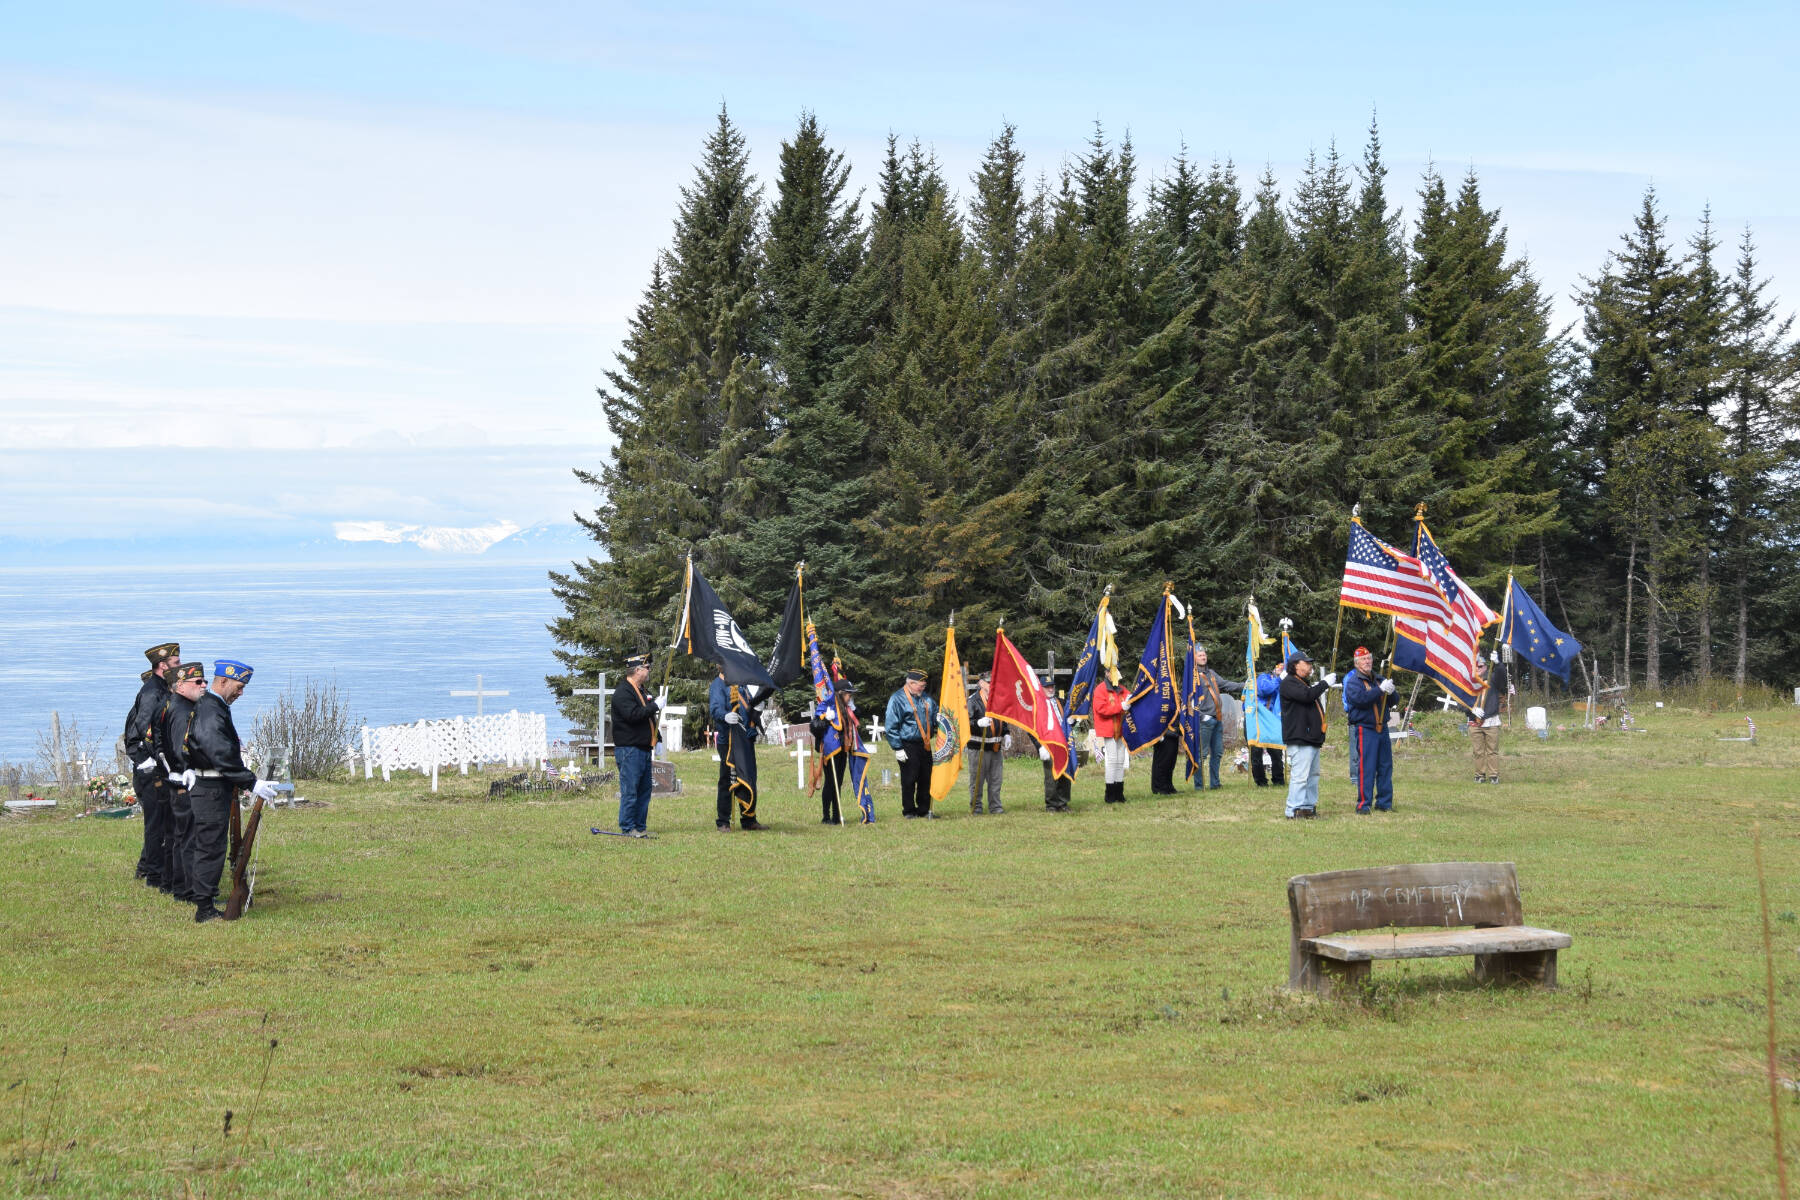 VFW Post 10221 post members and auxiliary members hold a Memorial Day service at the Anchor Point Kallman Cemetery on Monday, May 29, 2023 in Anchor Point, Alaska. (Delcenia Cosman/Homer News)